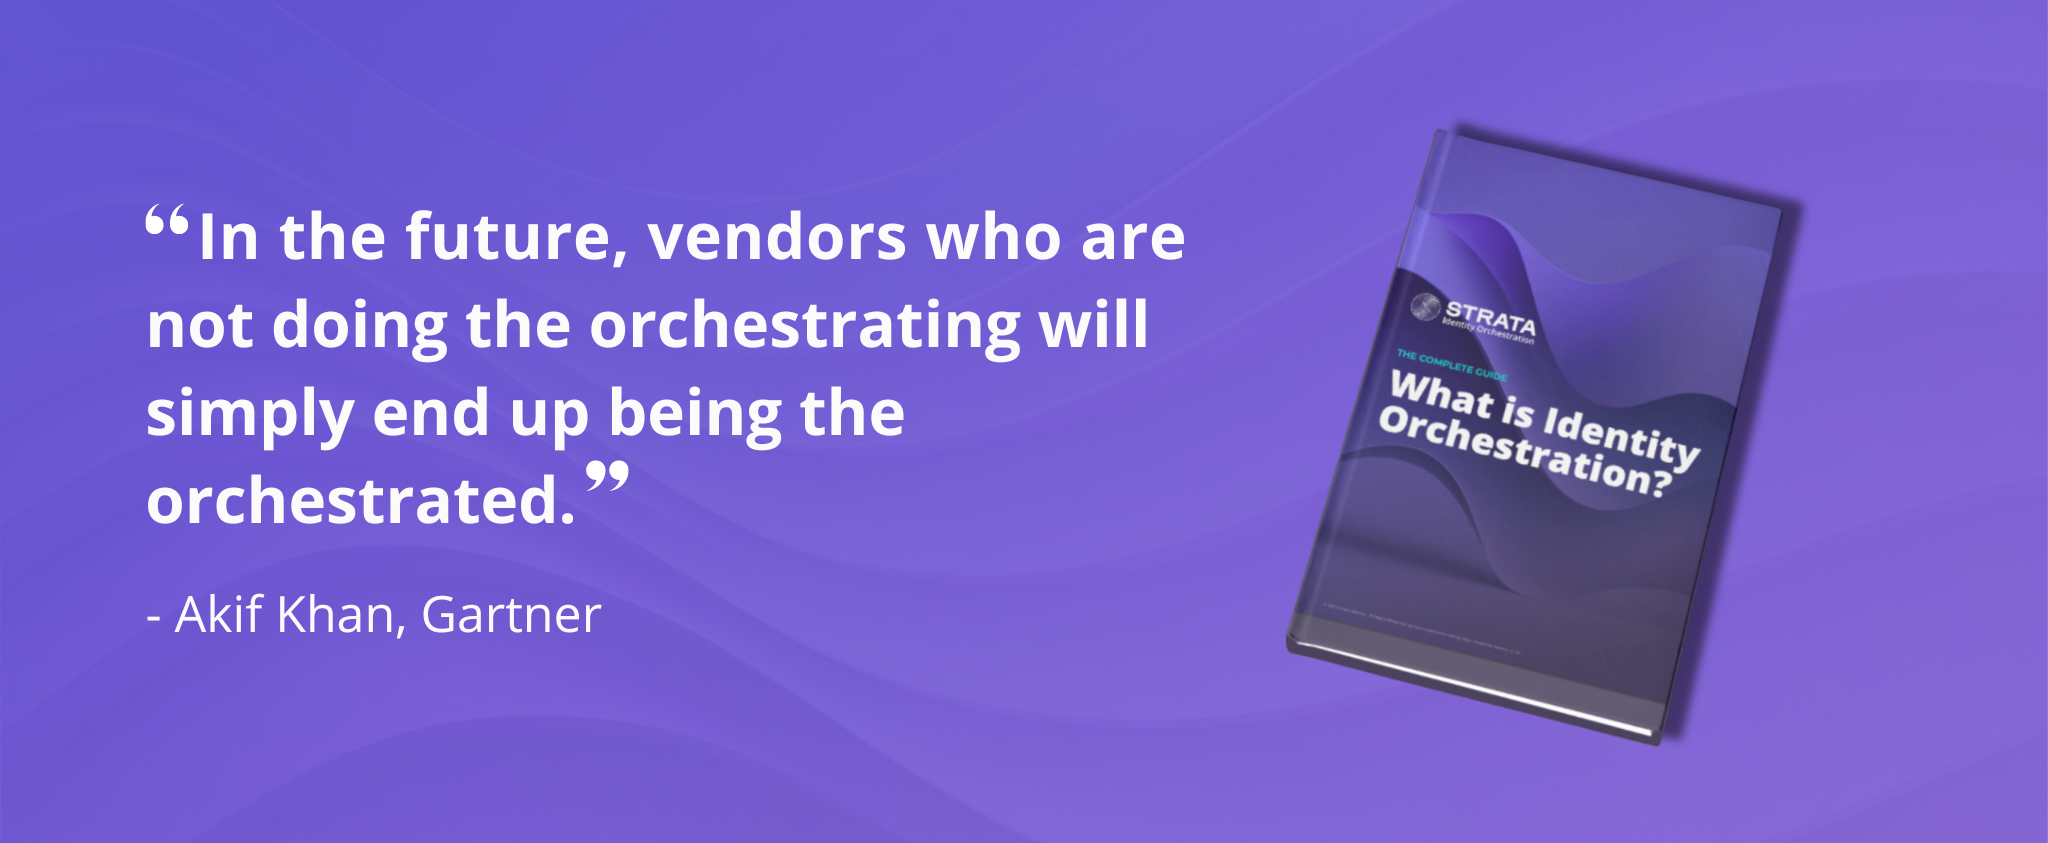 A promotional graphic featuring a quote about the future of identity orchestration by Akif Khan from Gartner, along with an illustrative image of a book titled "What is Identity Orchestration? The complete guide"